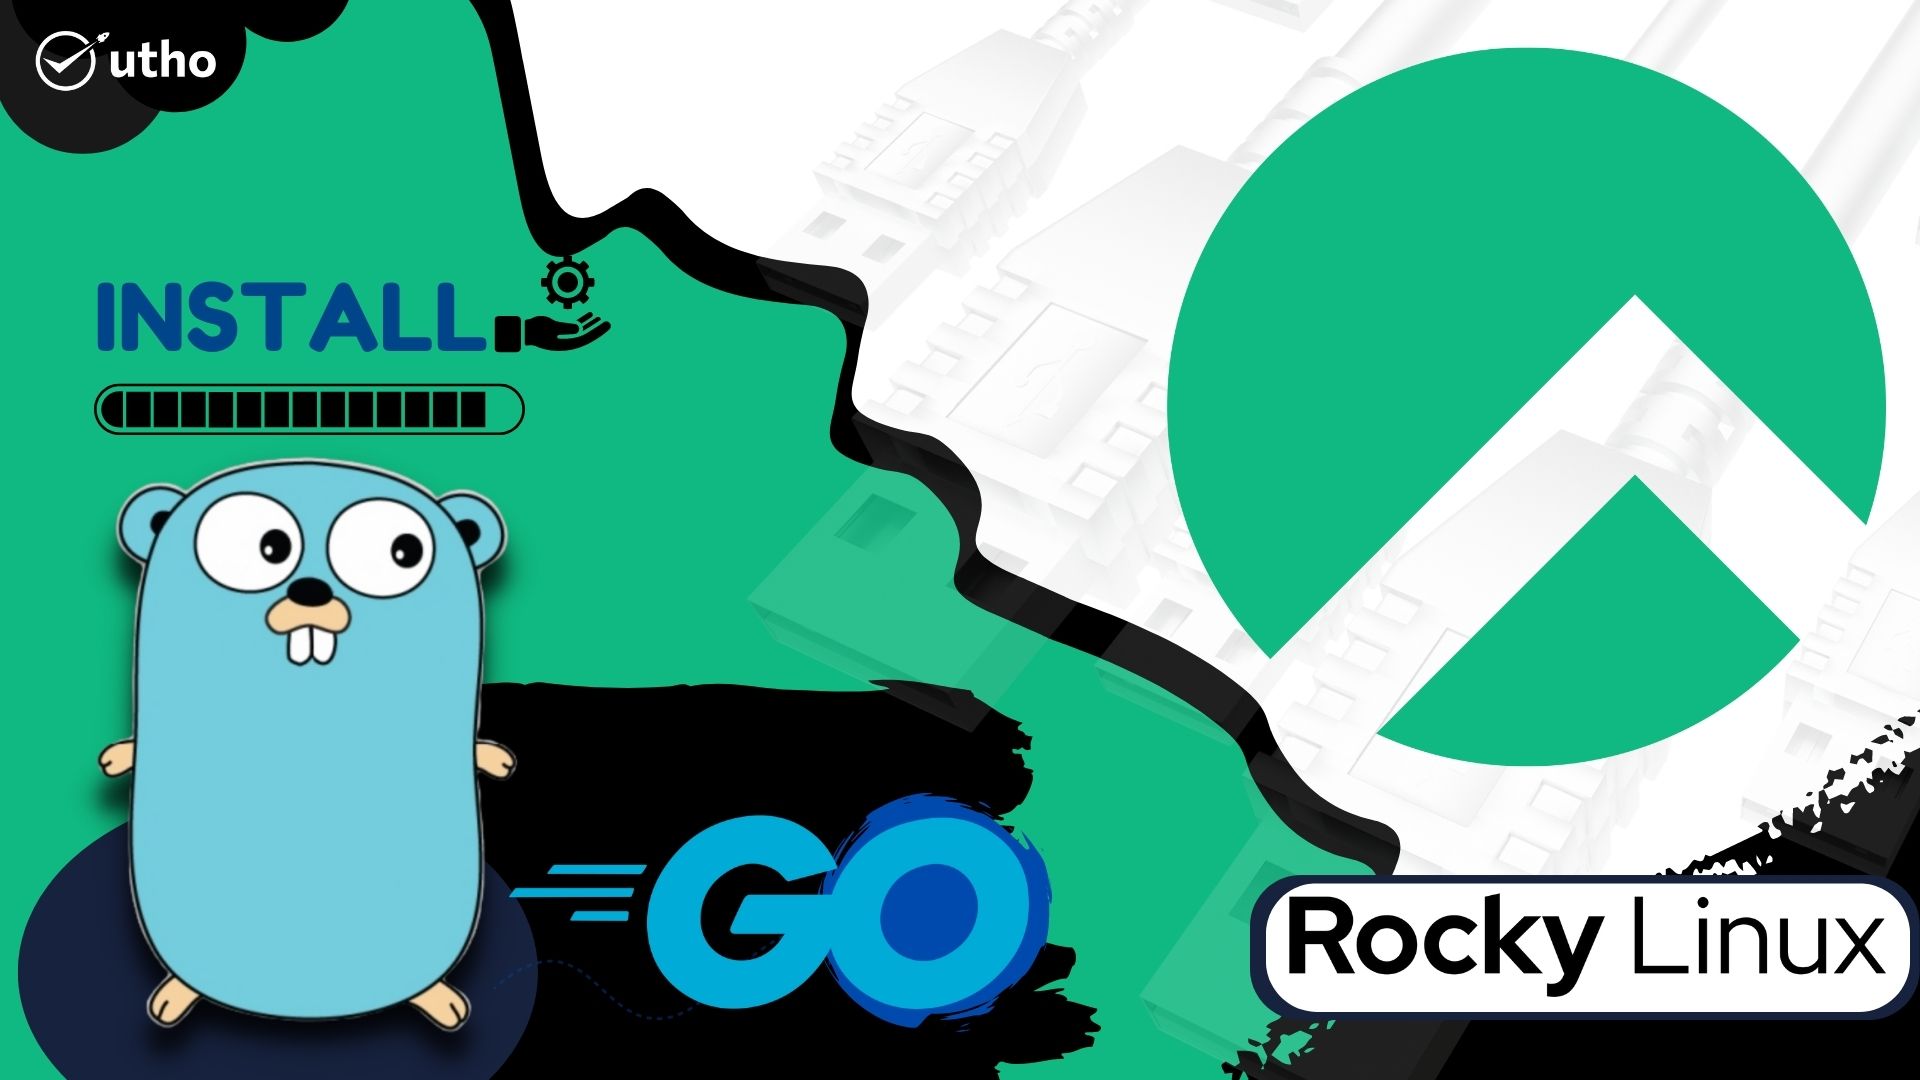 How to install Go on Rocky Linux